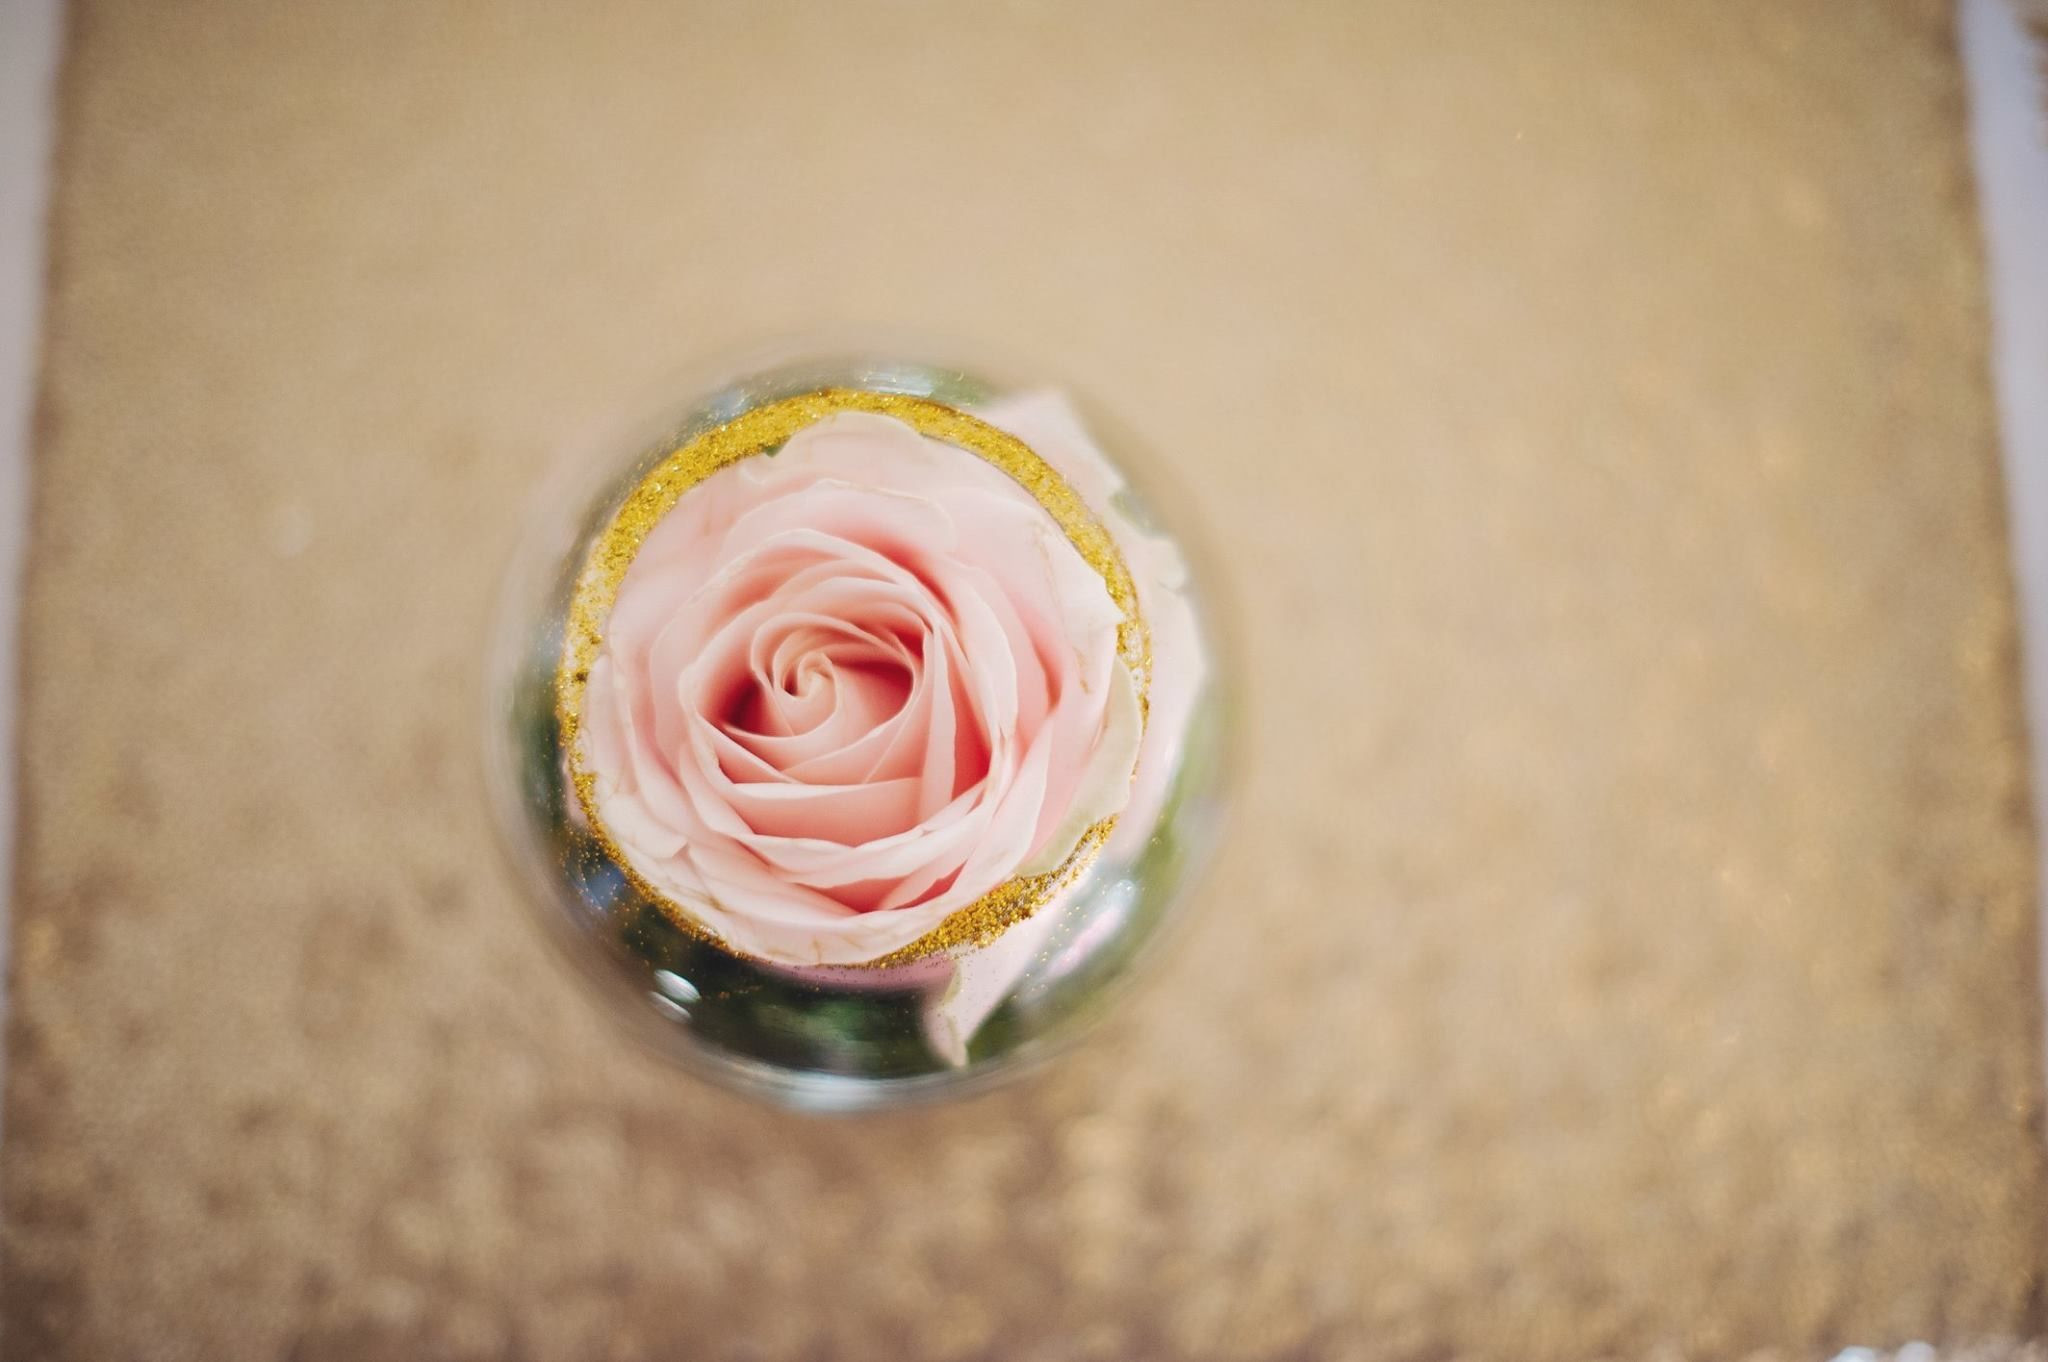 16 Elegant Rose Gold Glitter Vase 2024 free download rose gold glitter vase of stunning pale pink rose sitting on a small bed of moss in a bud vase for stunning pale pink rose sitting on a small bed of moss in a bud vase trimmed